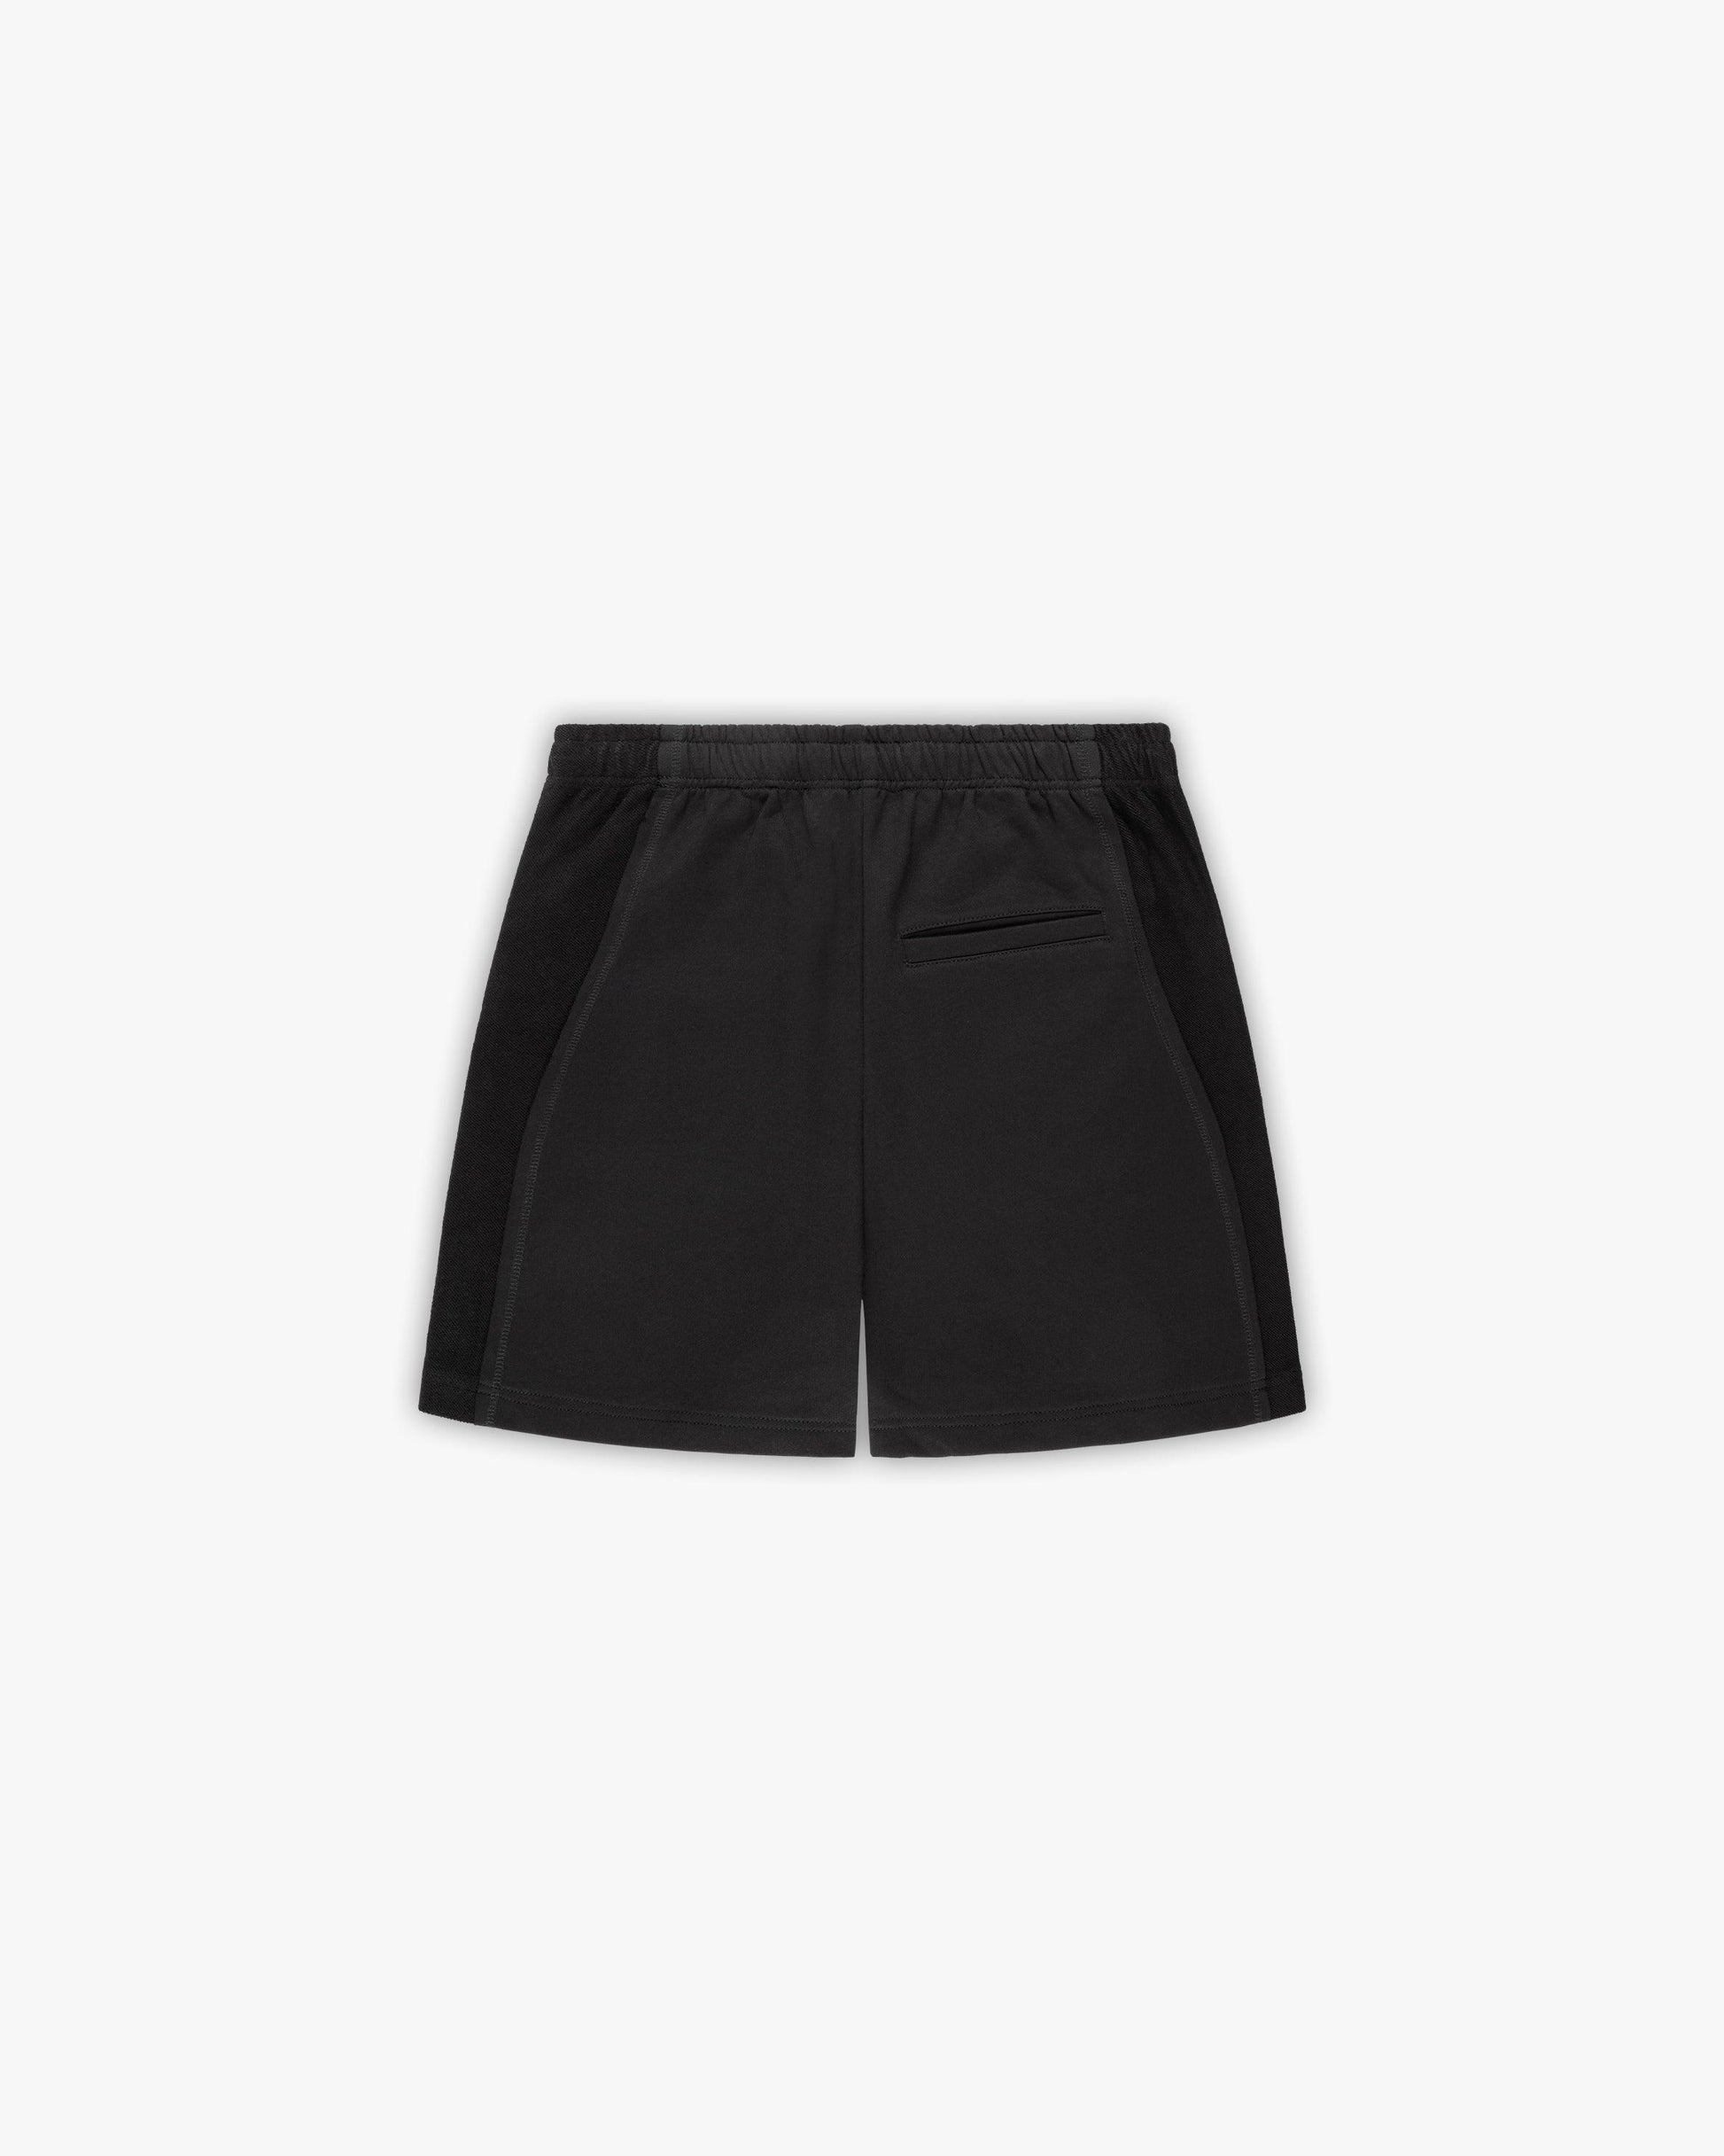 INSIDE OUT SHORTS BLACK - VICINITY